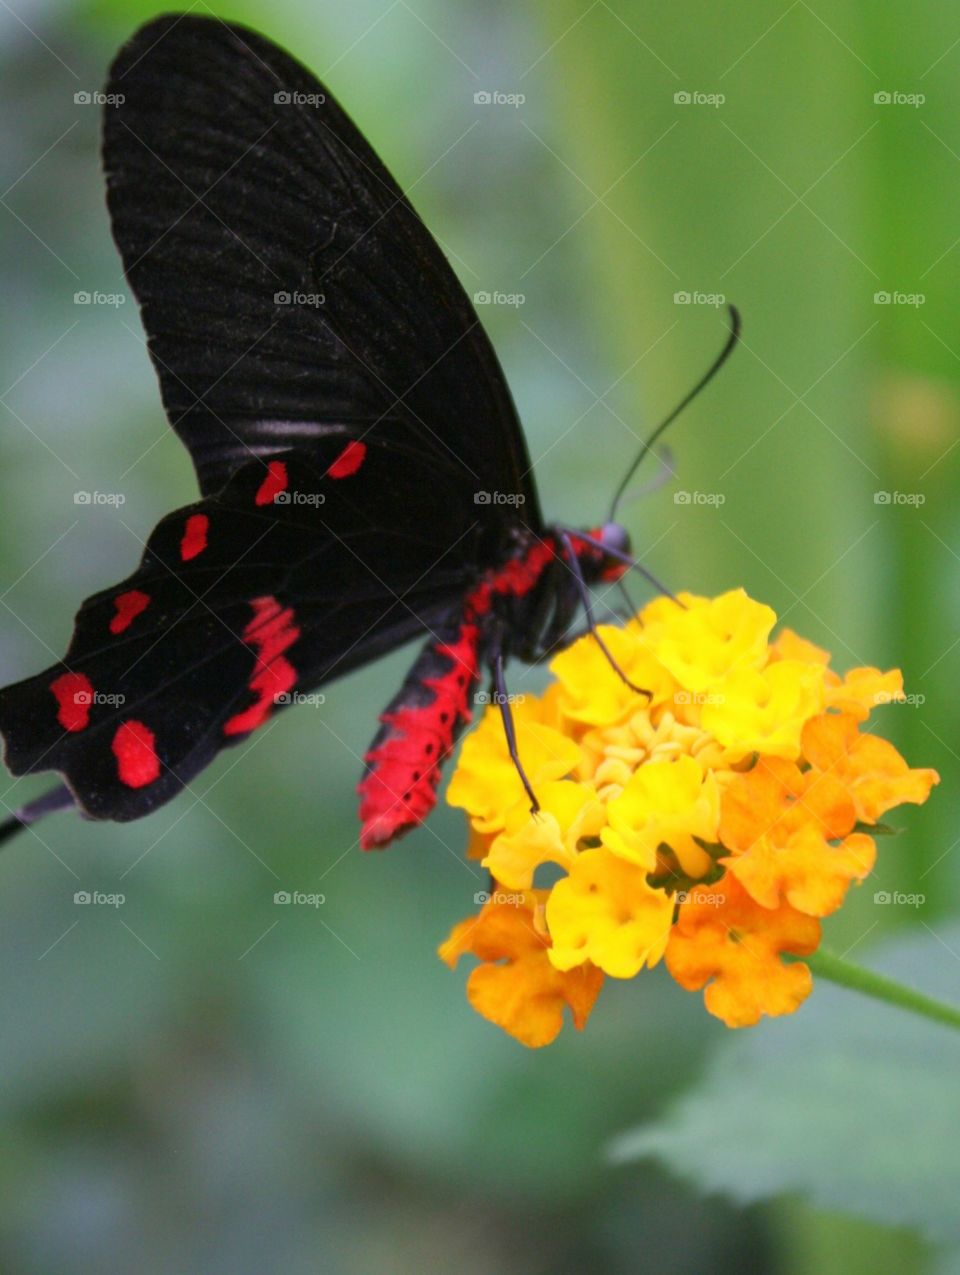 Red butterfly 